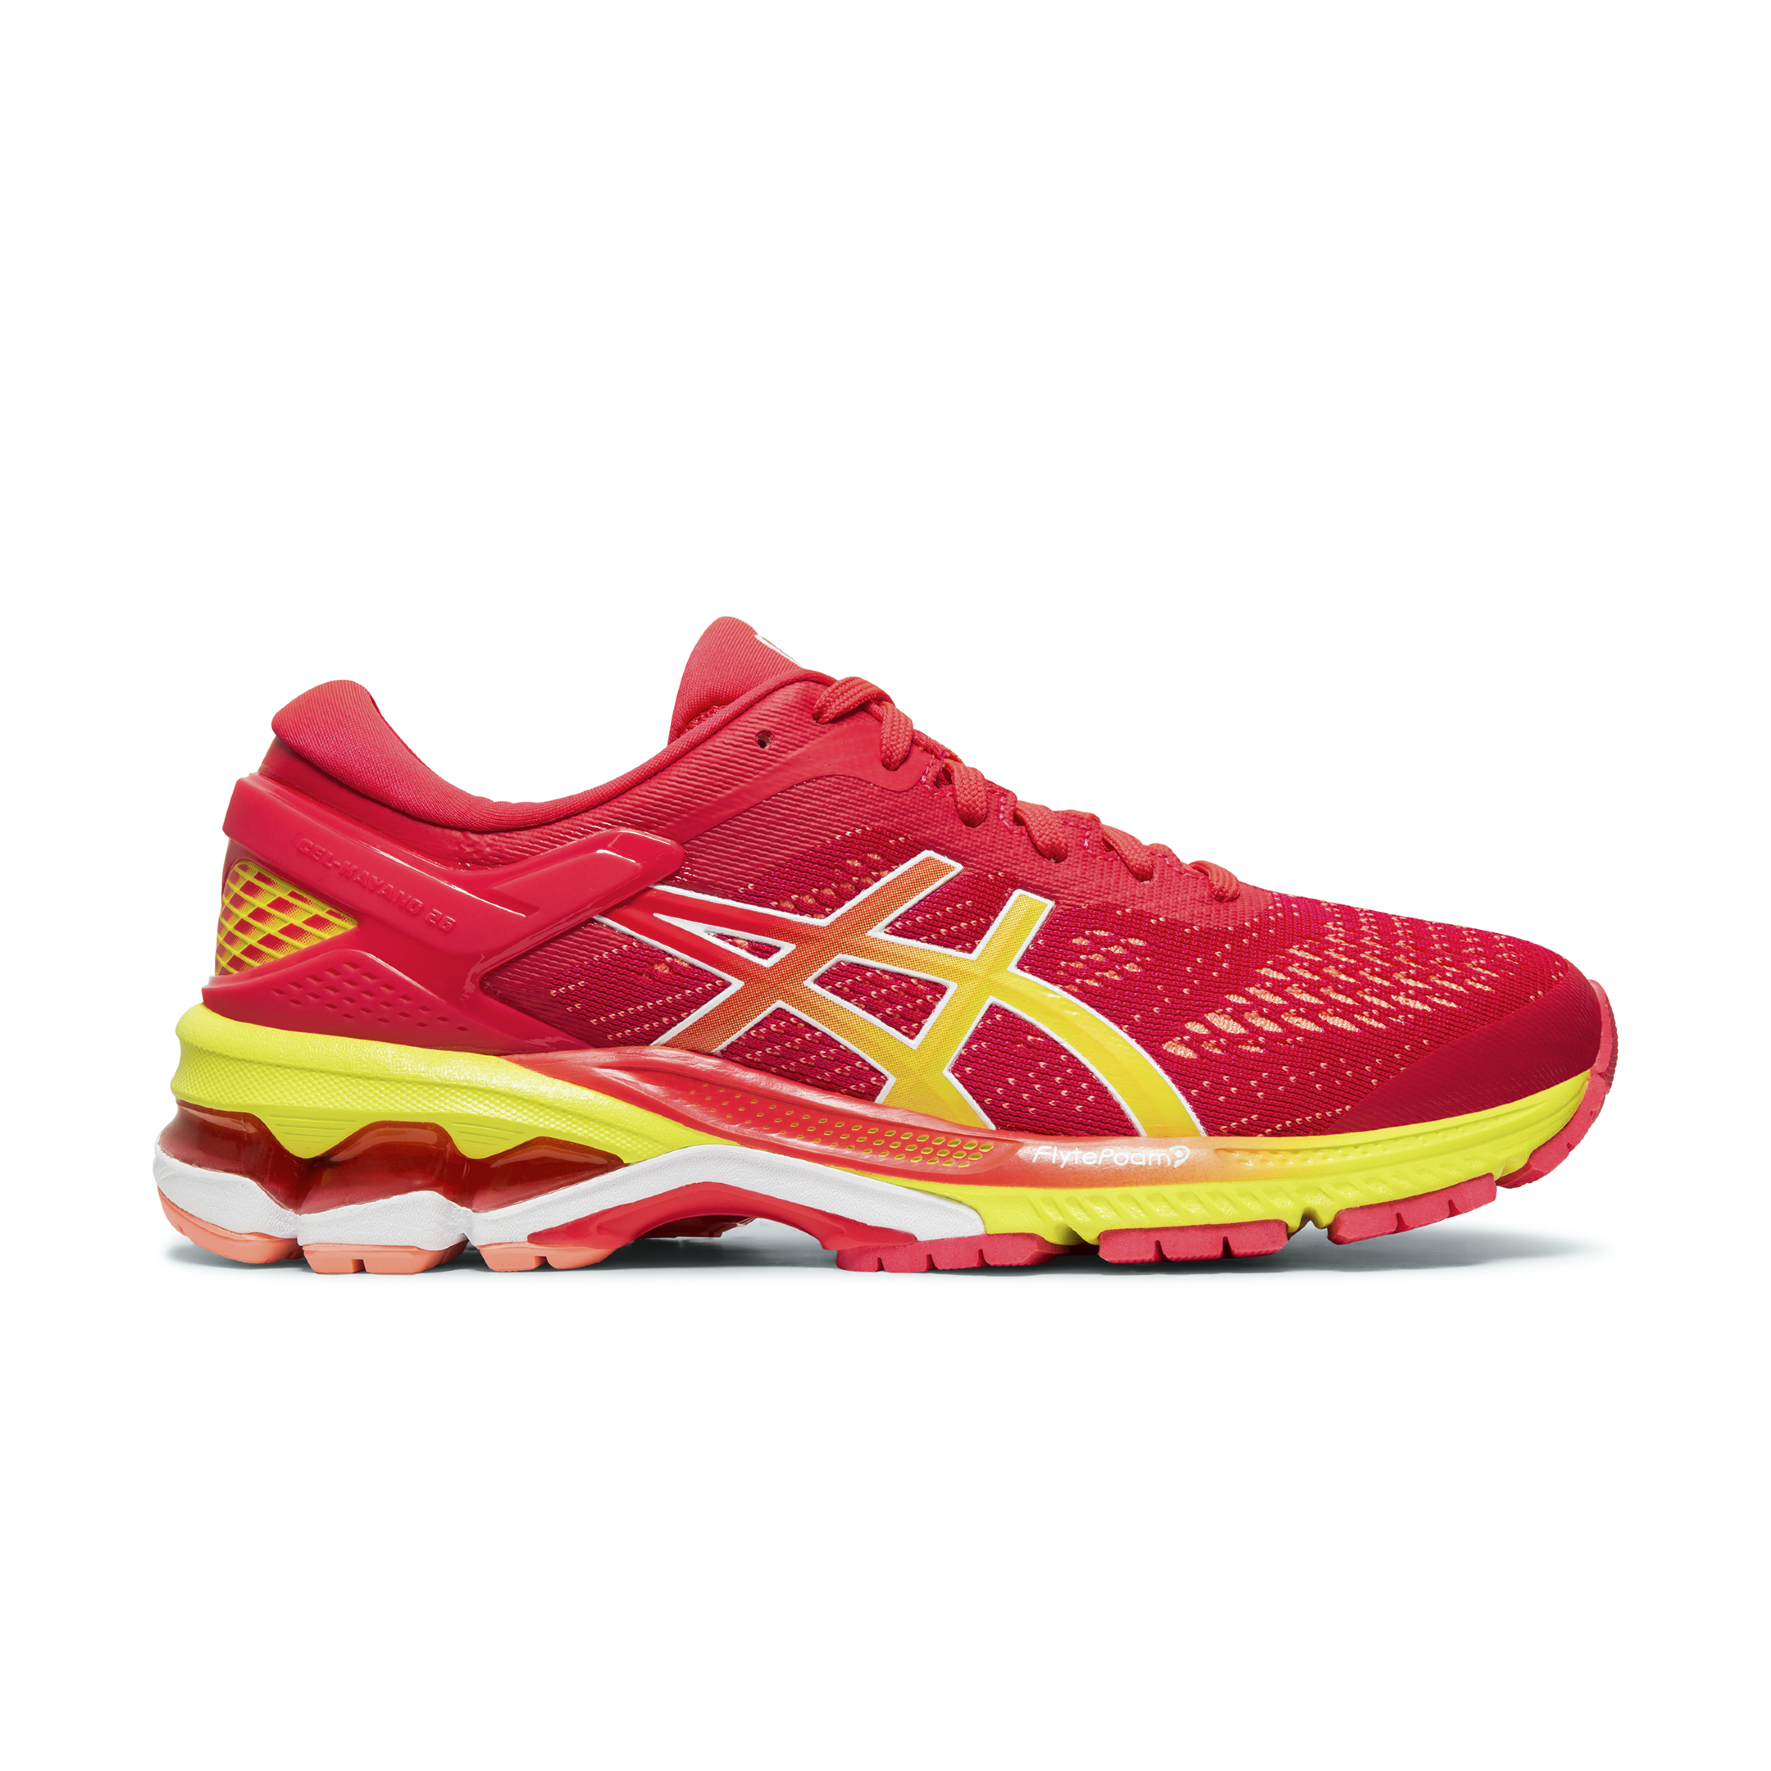 Asics Gel Kayano Dame Online Sale, UP TO 70% OFF